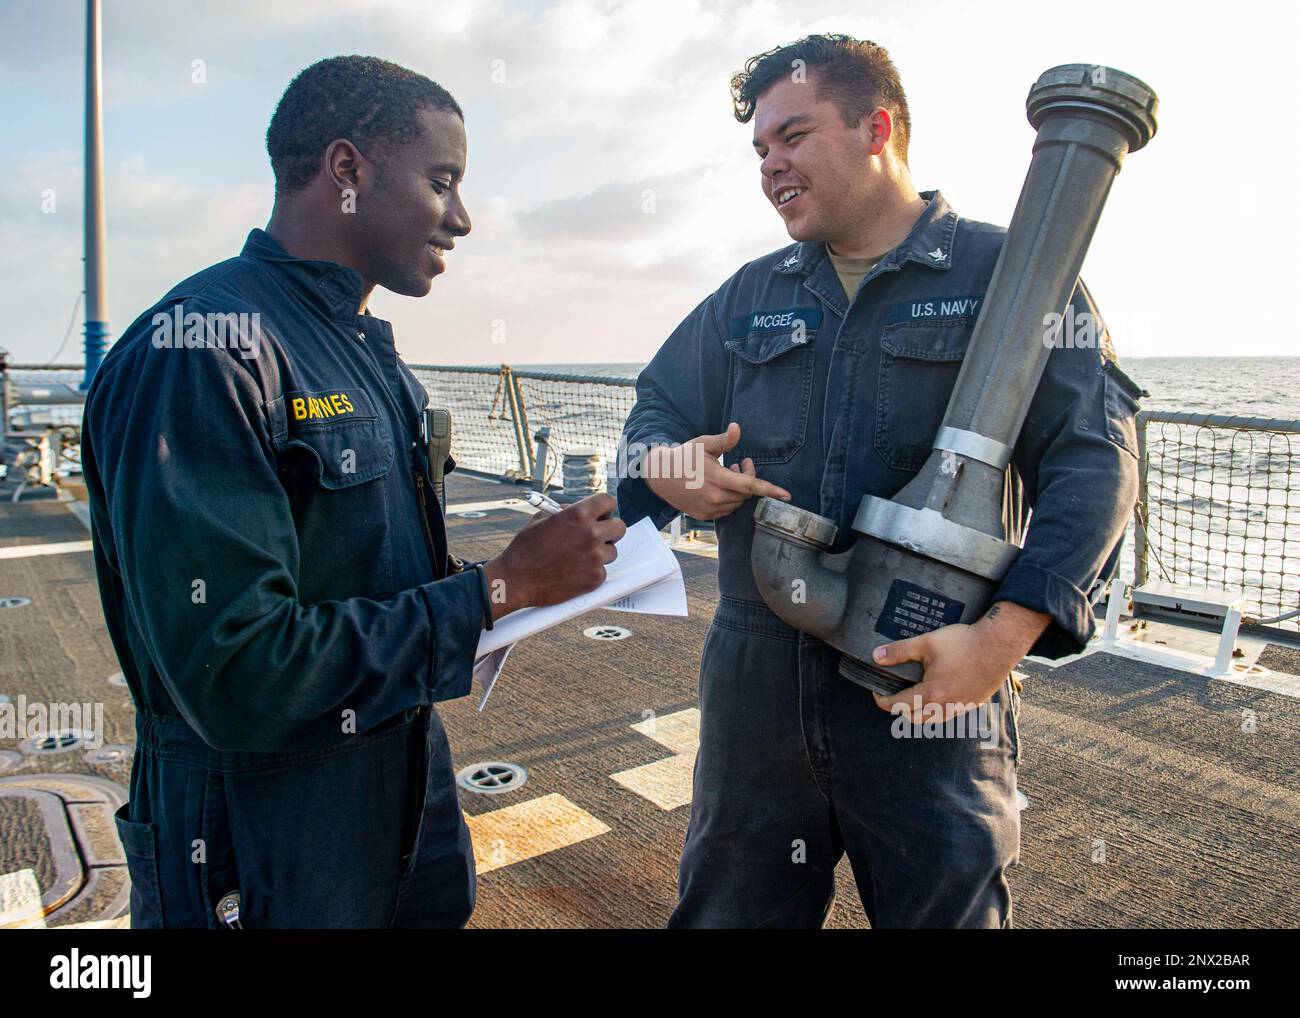 230215-N-NH267-1175 ARABIAN SEA (Feb. 15, 2023) Lt. j.g. Cedric Barnes,  left, discusses peri-jet dewatering capabilities with Hull Repair  Technician 3rd Class Andrew McGee during damage control training on the  flight deck of